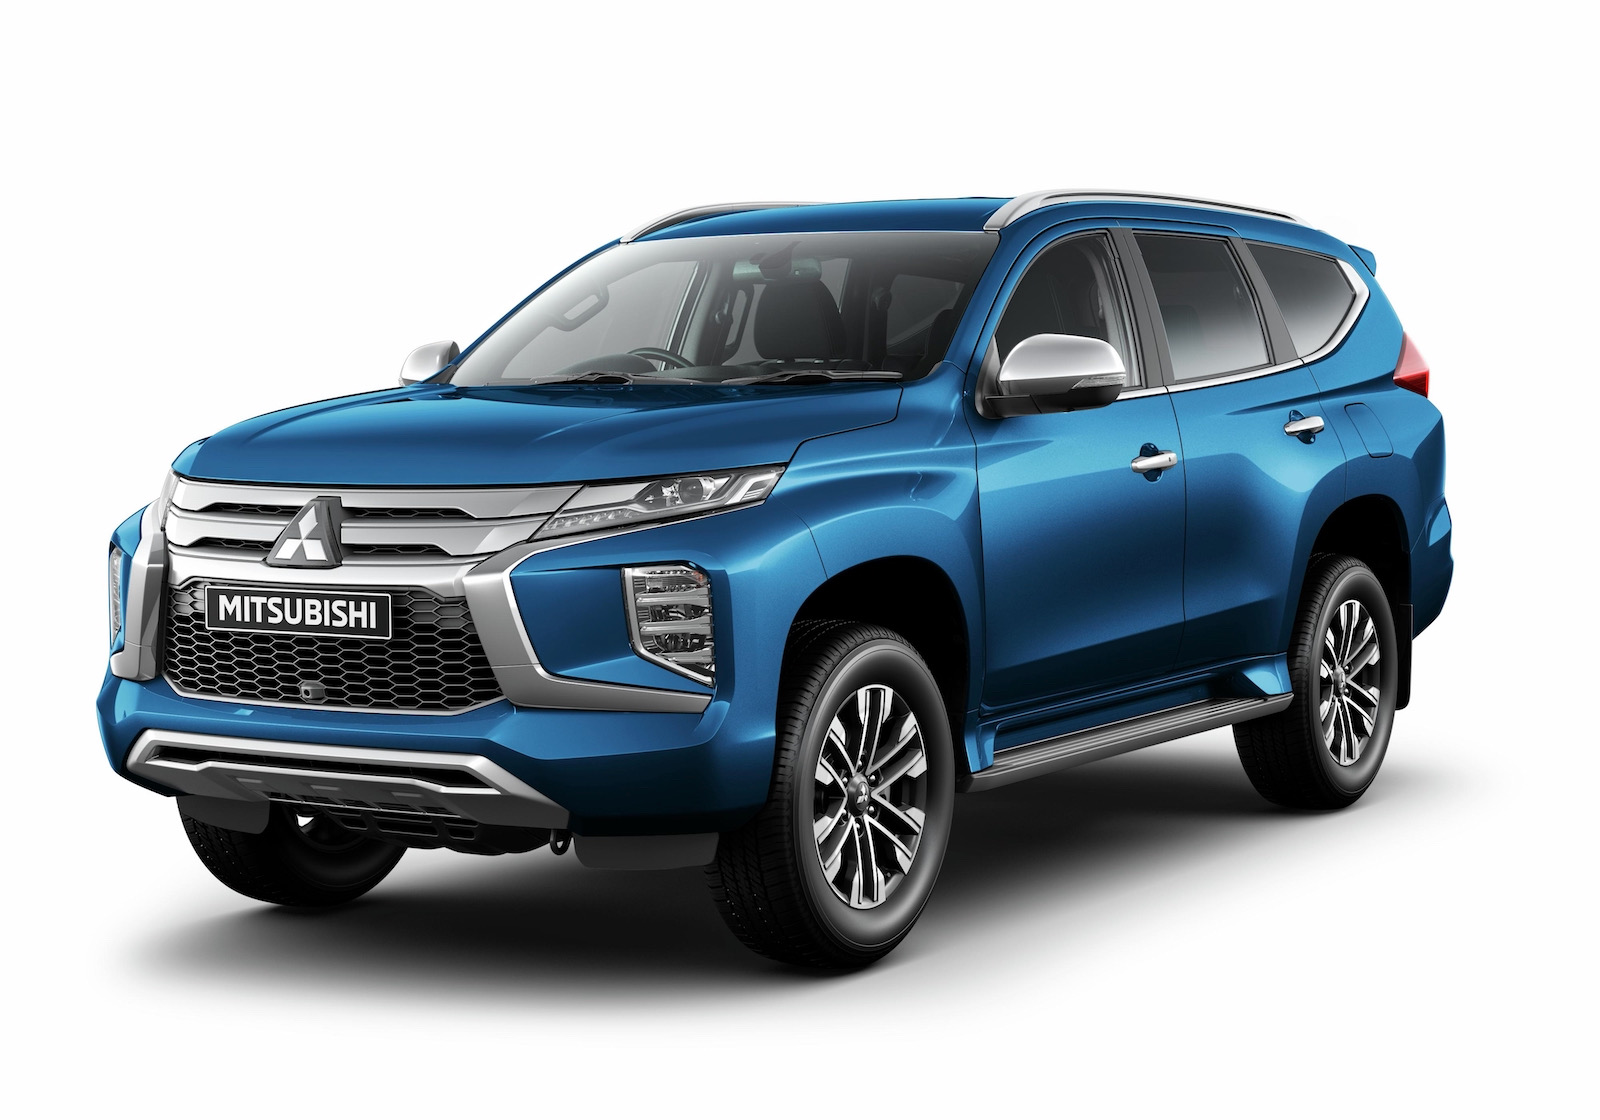 MY2023 Mitsubishi Pajero Sport update announced, arrives in April